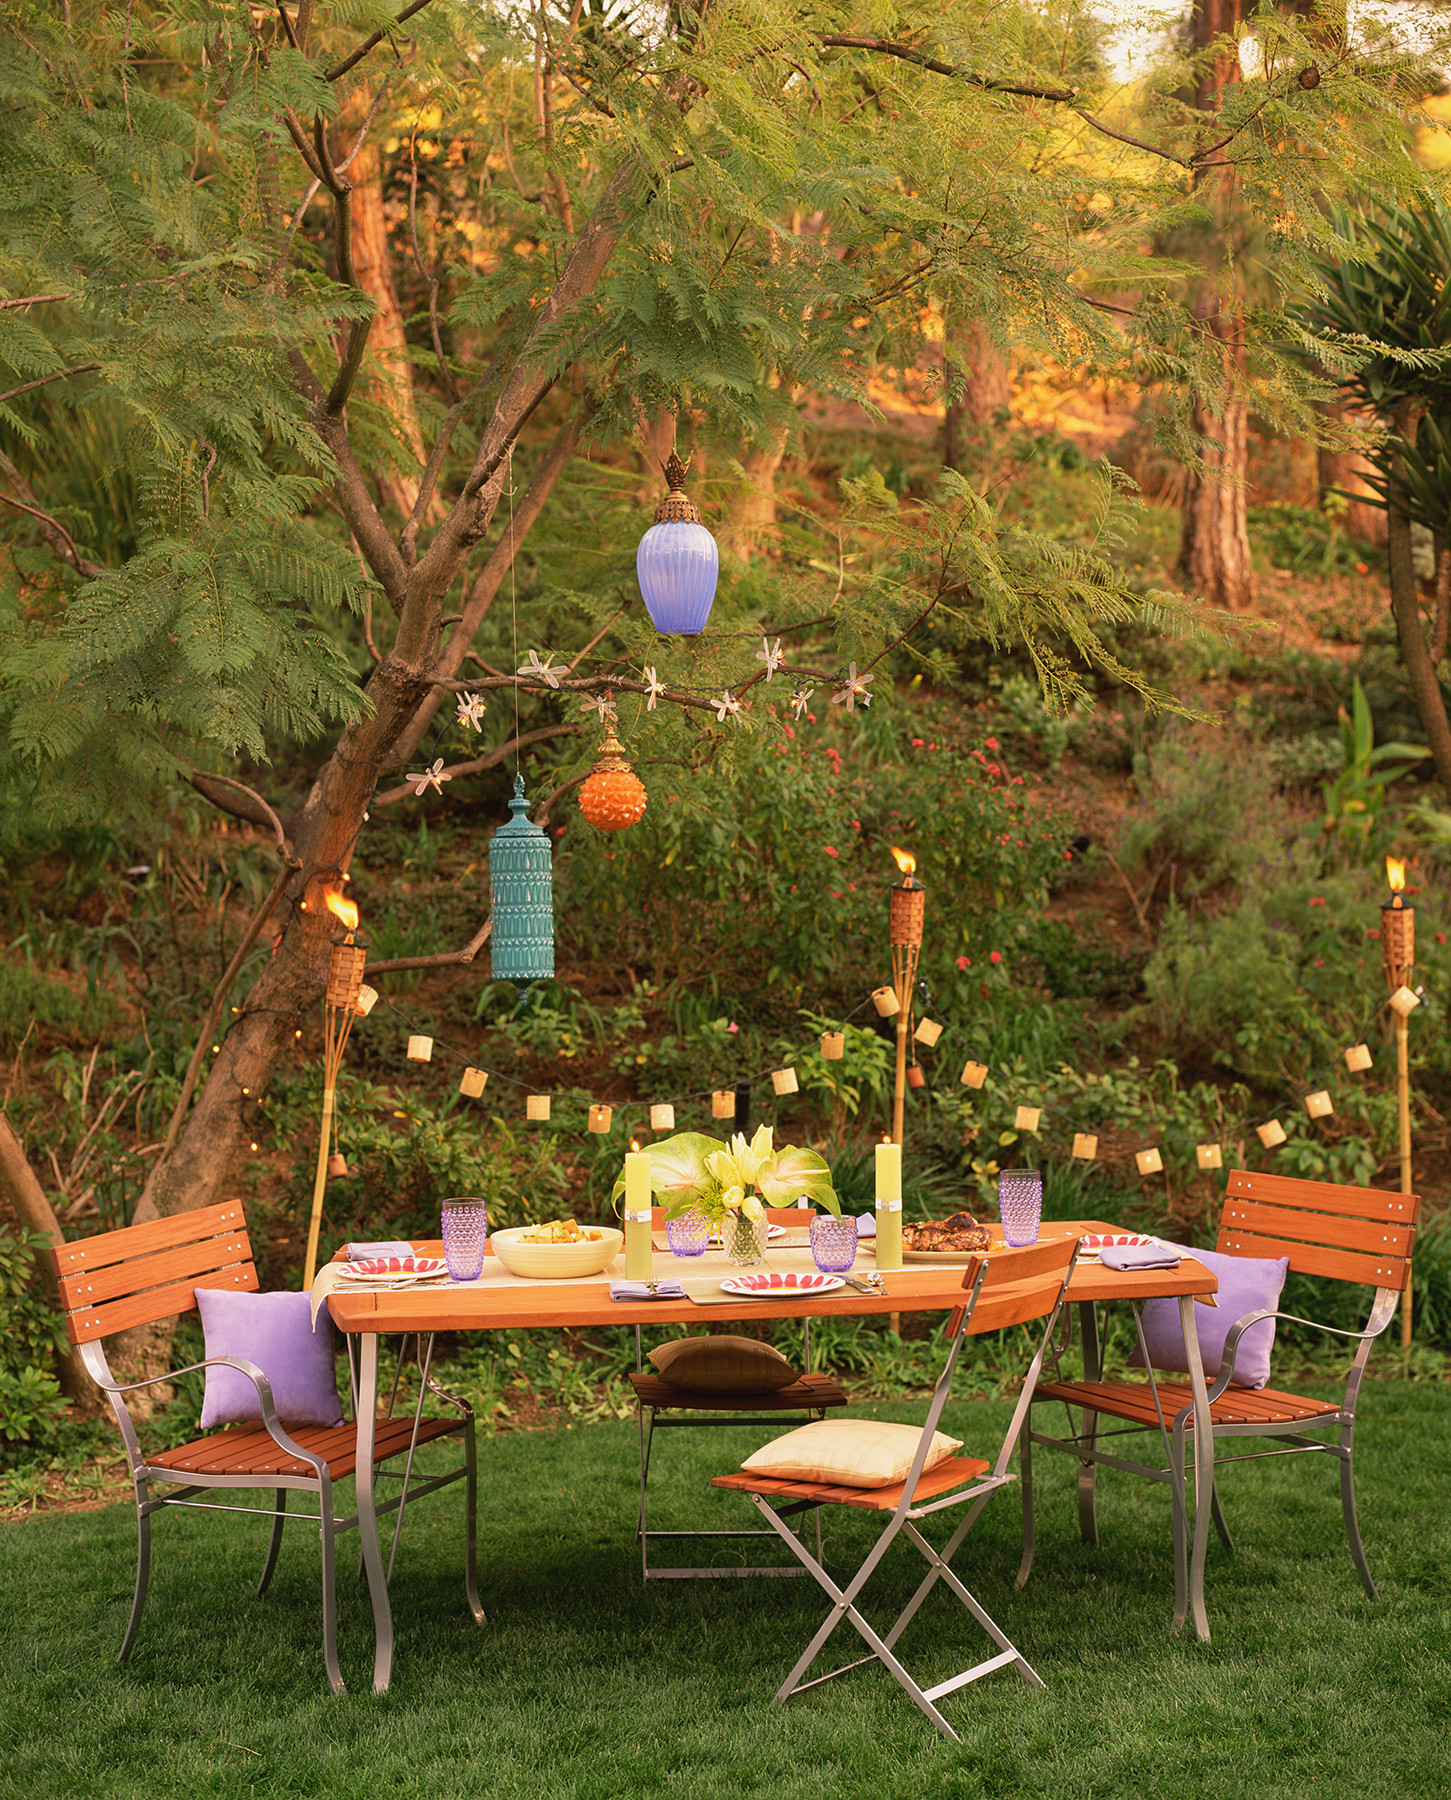 Backyard Lighting Ideas For A Party
 17 Outdoor Party Ideas for an Effortless Backyard